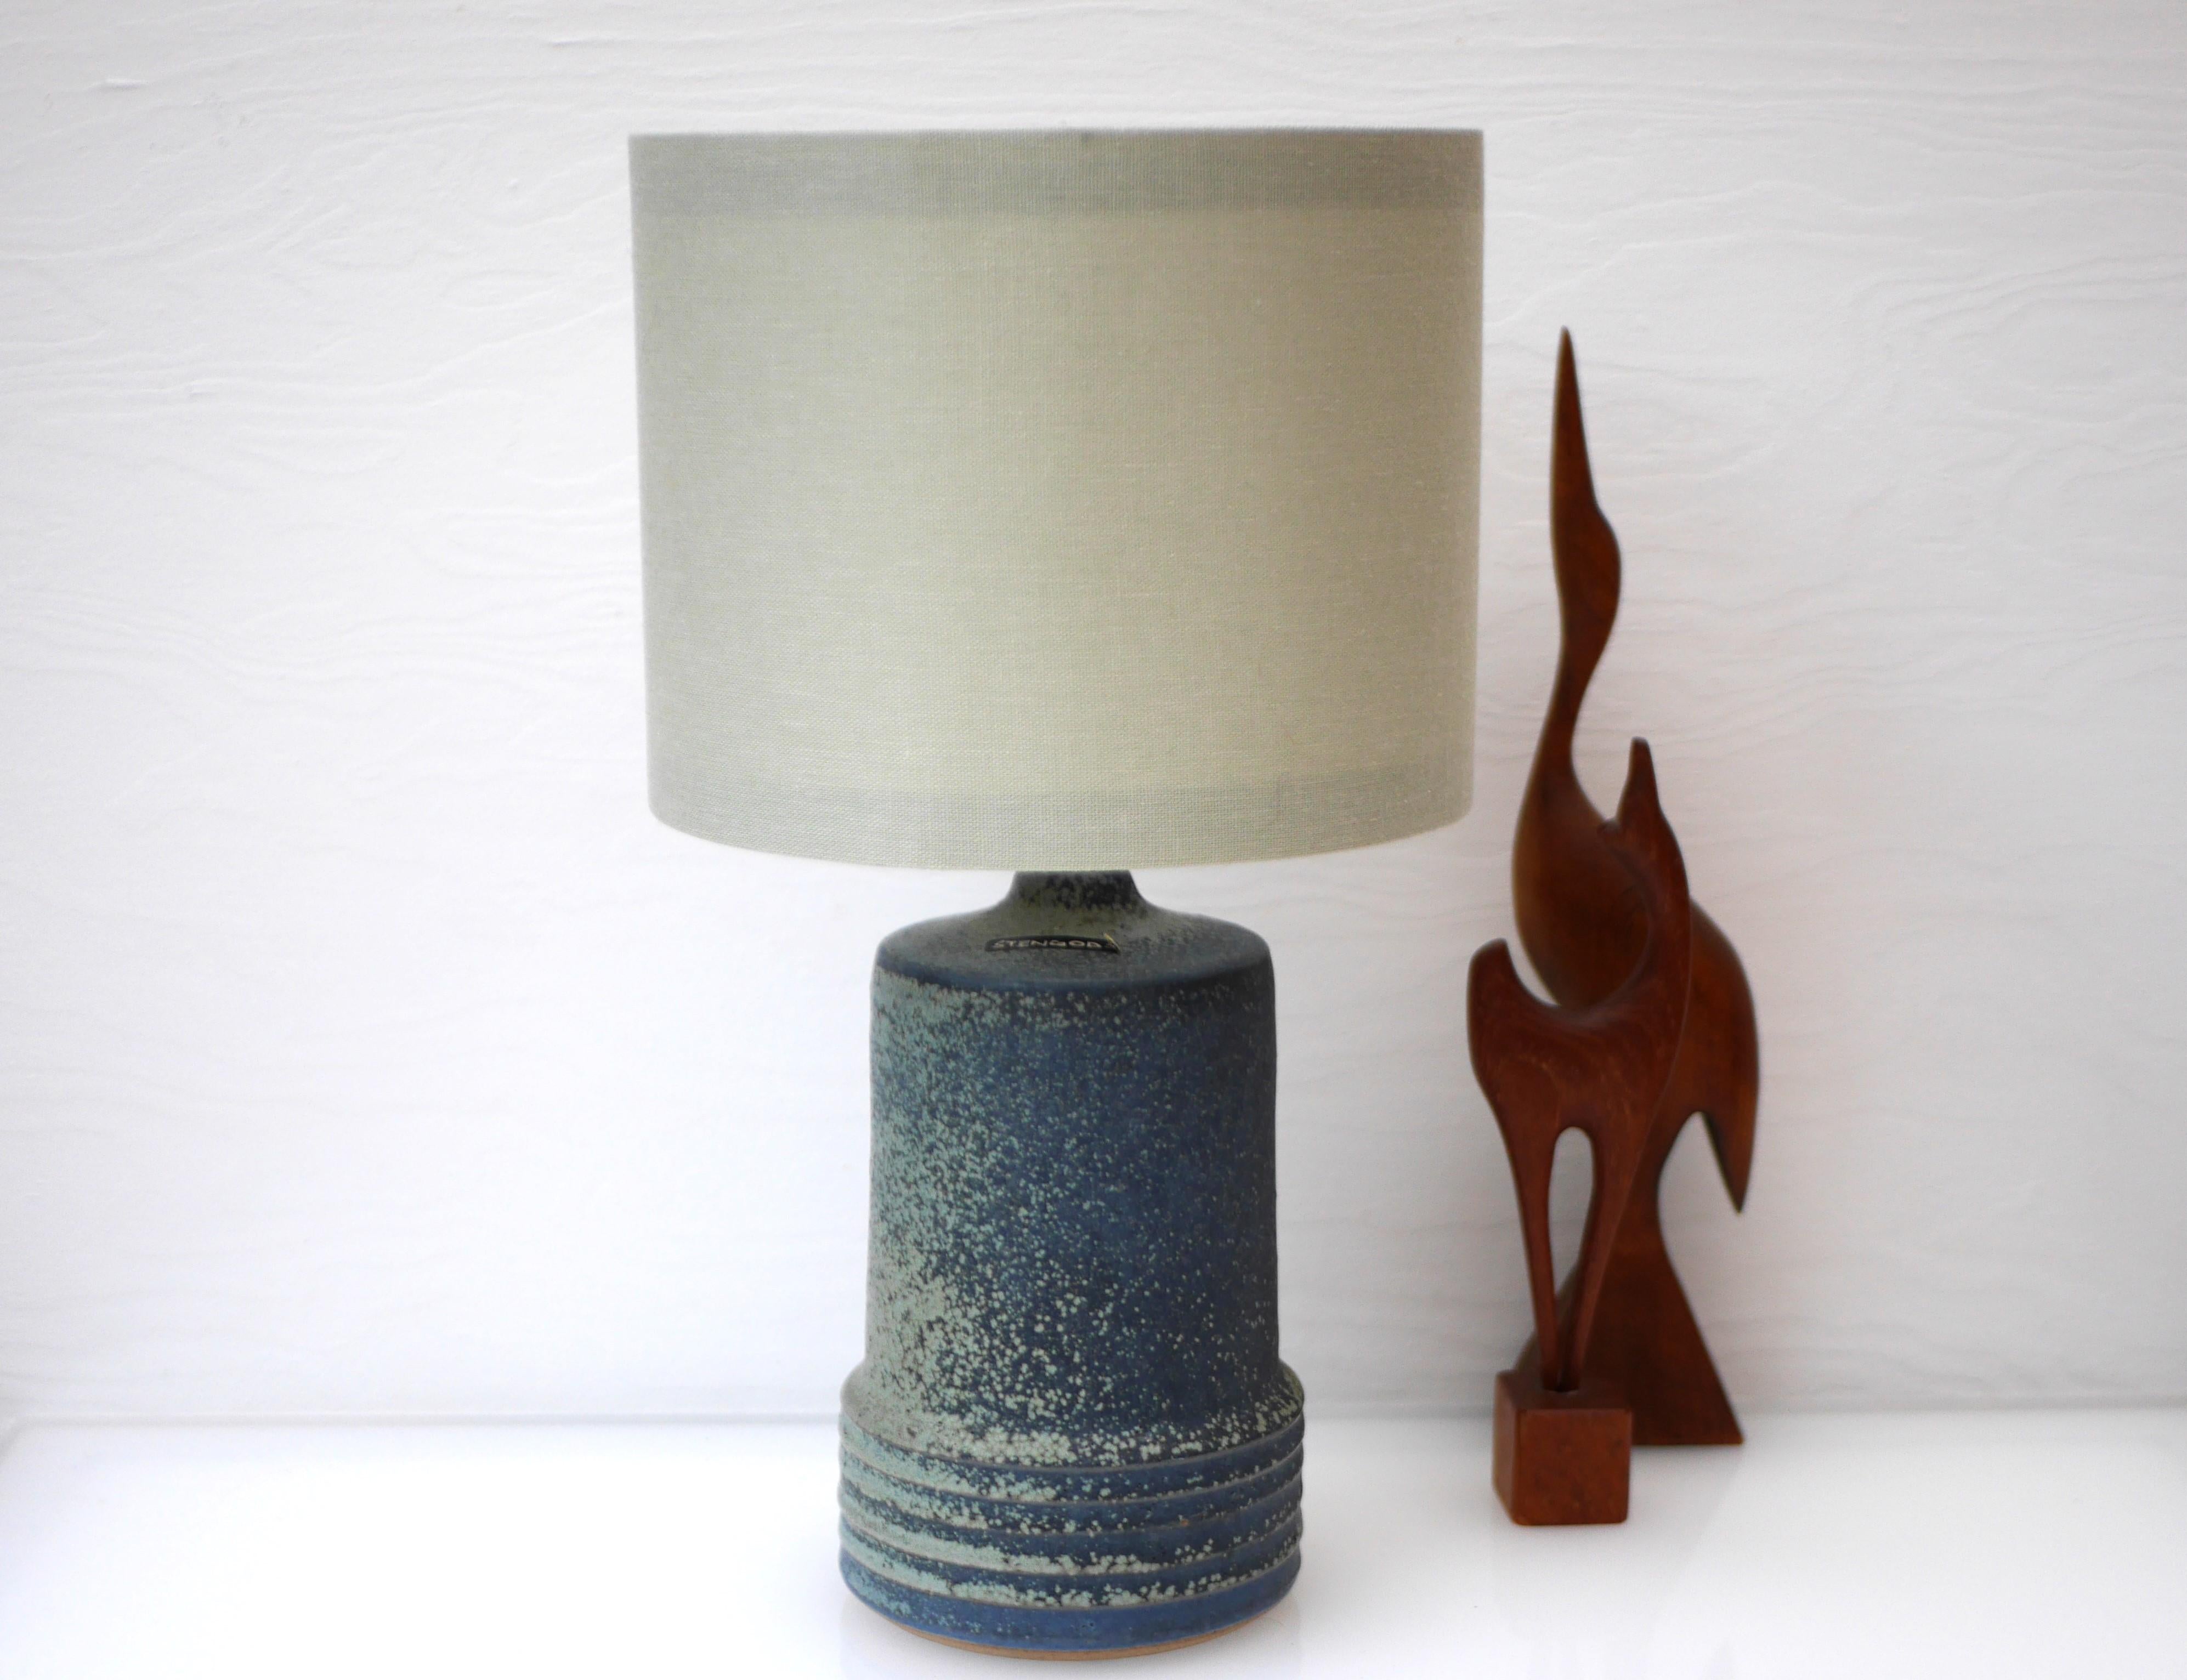 A gorgeous vintage handmade ceramic stoneware table lamp base made by Rolf Palm, Höganäs, Sweden. This lamp is a classic, elegant and timeless lamp. The shape is as most of his work simple, it has a contemporary feeling, yet it is the glazing that